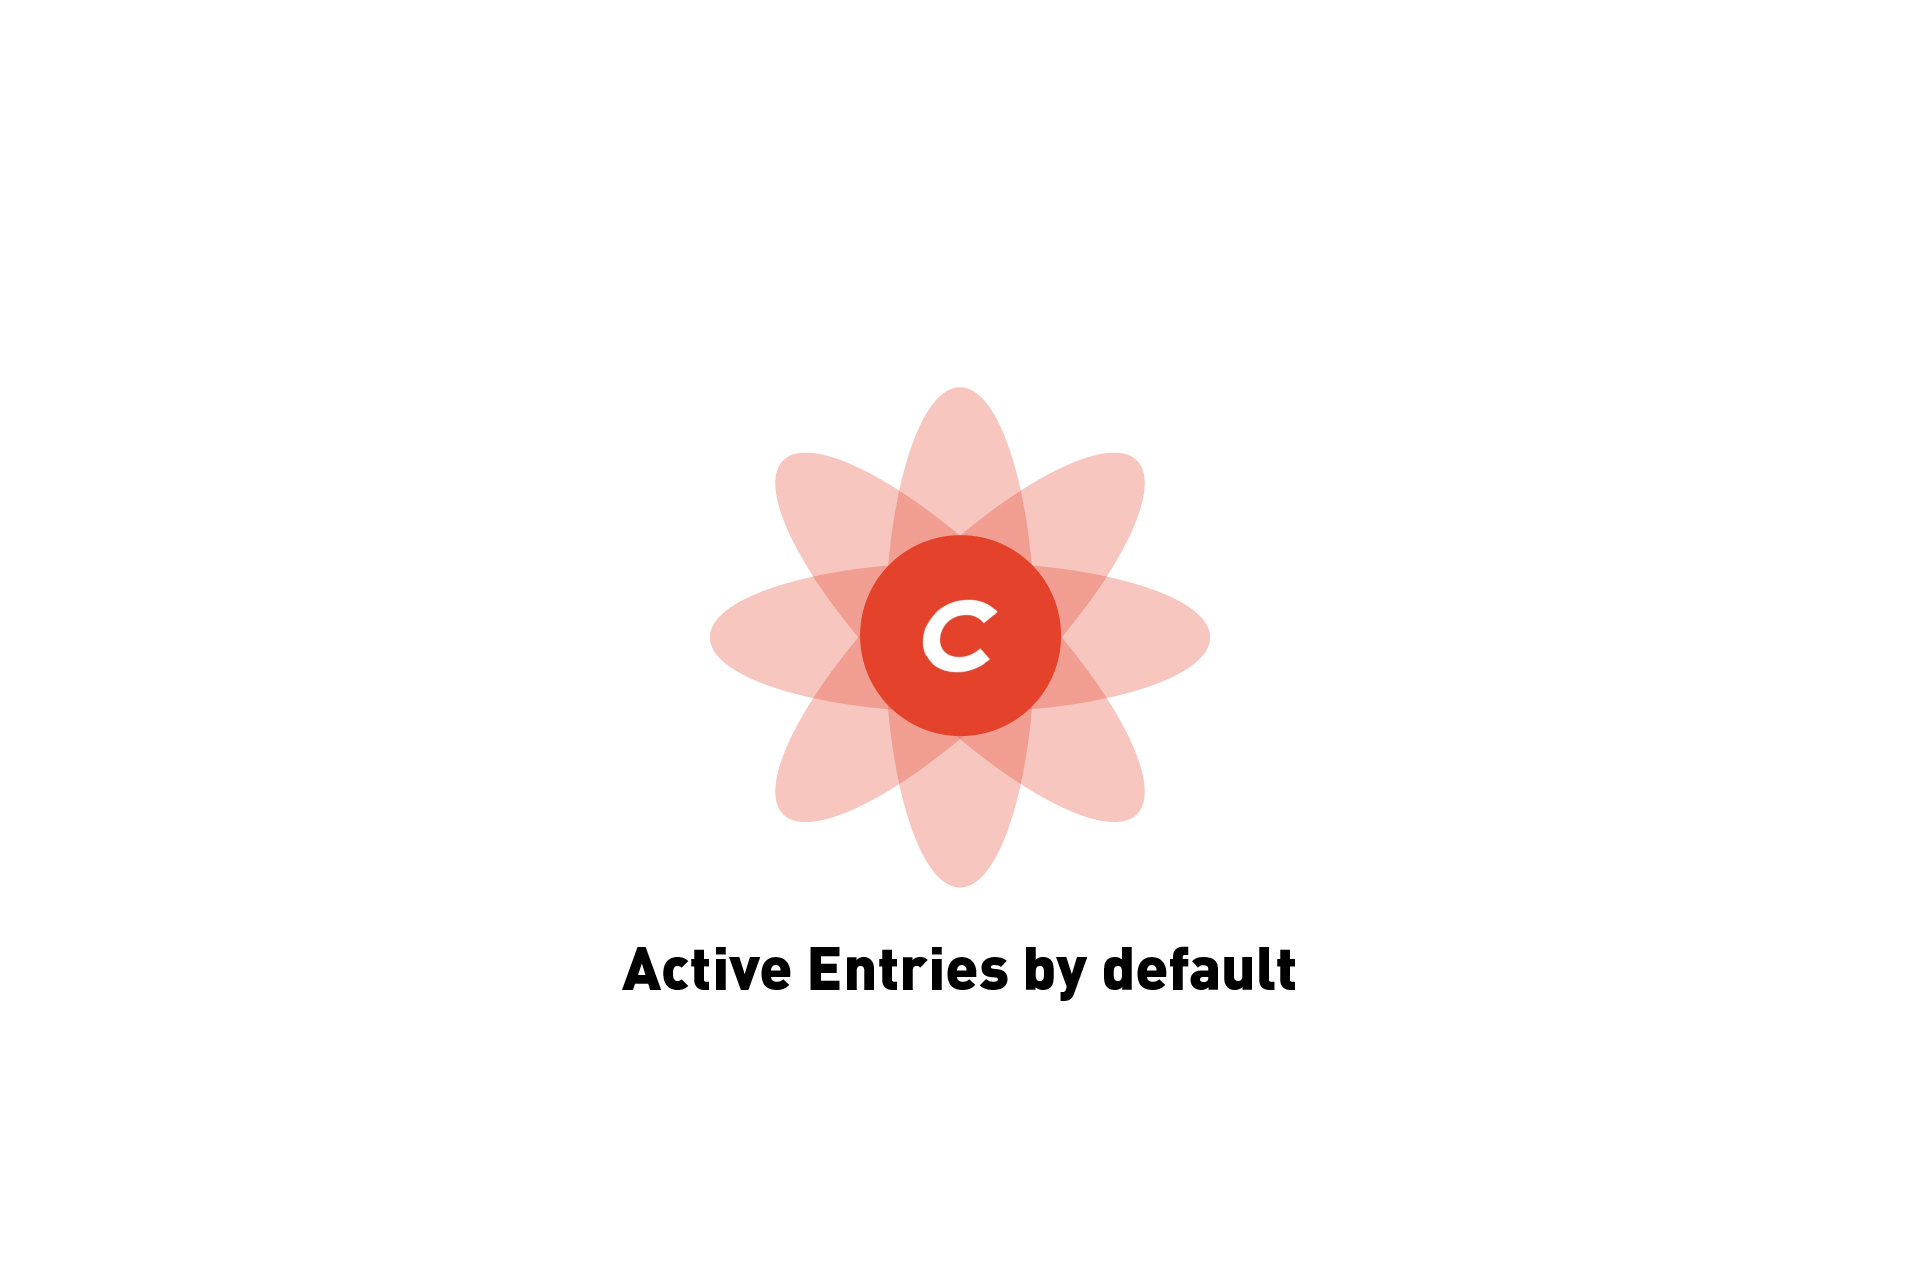 A flower that represents Craft CMS with the text 'Active Entries by Default' beneath it.